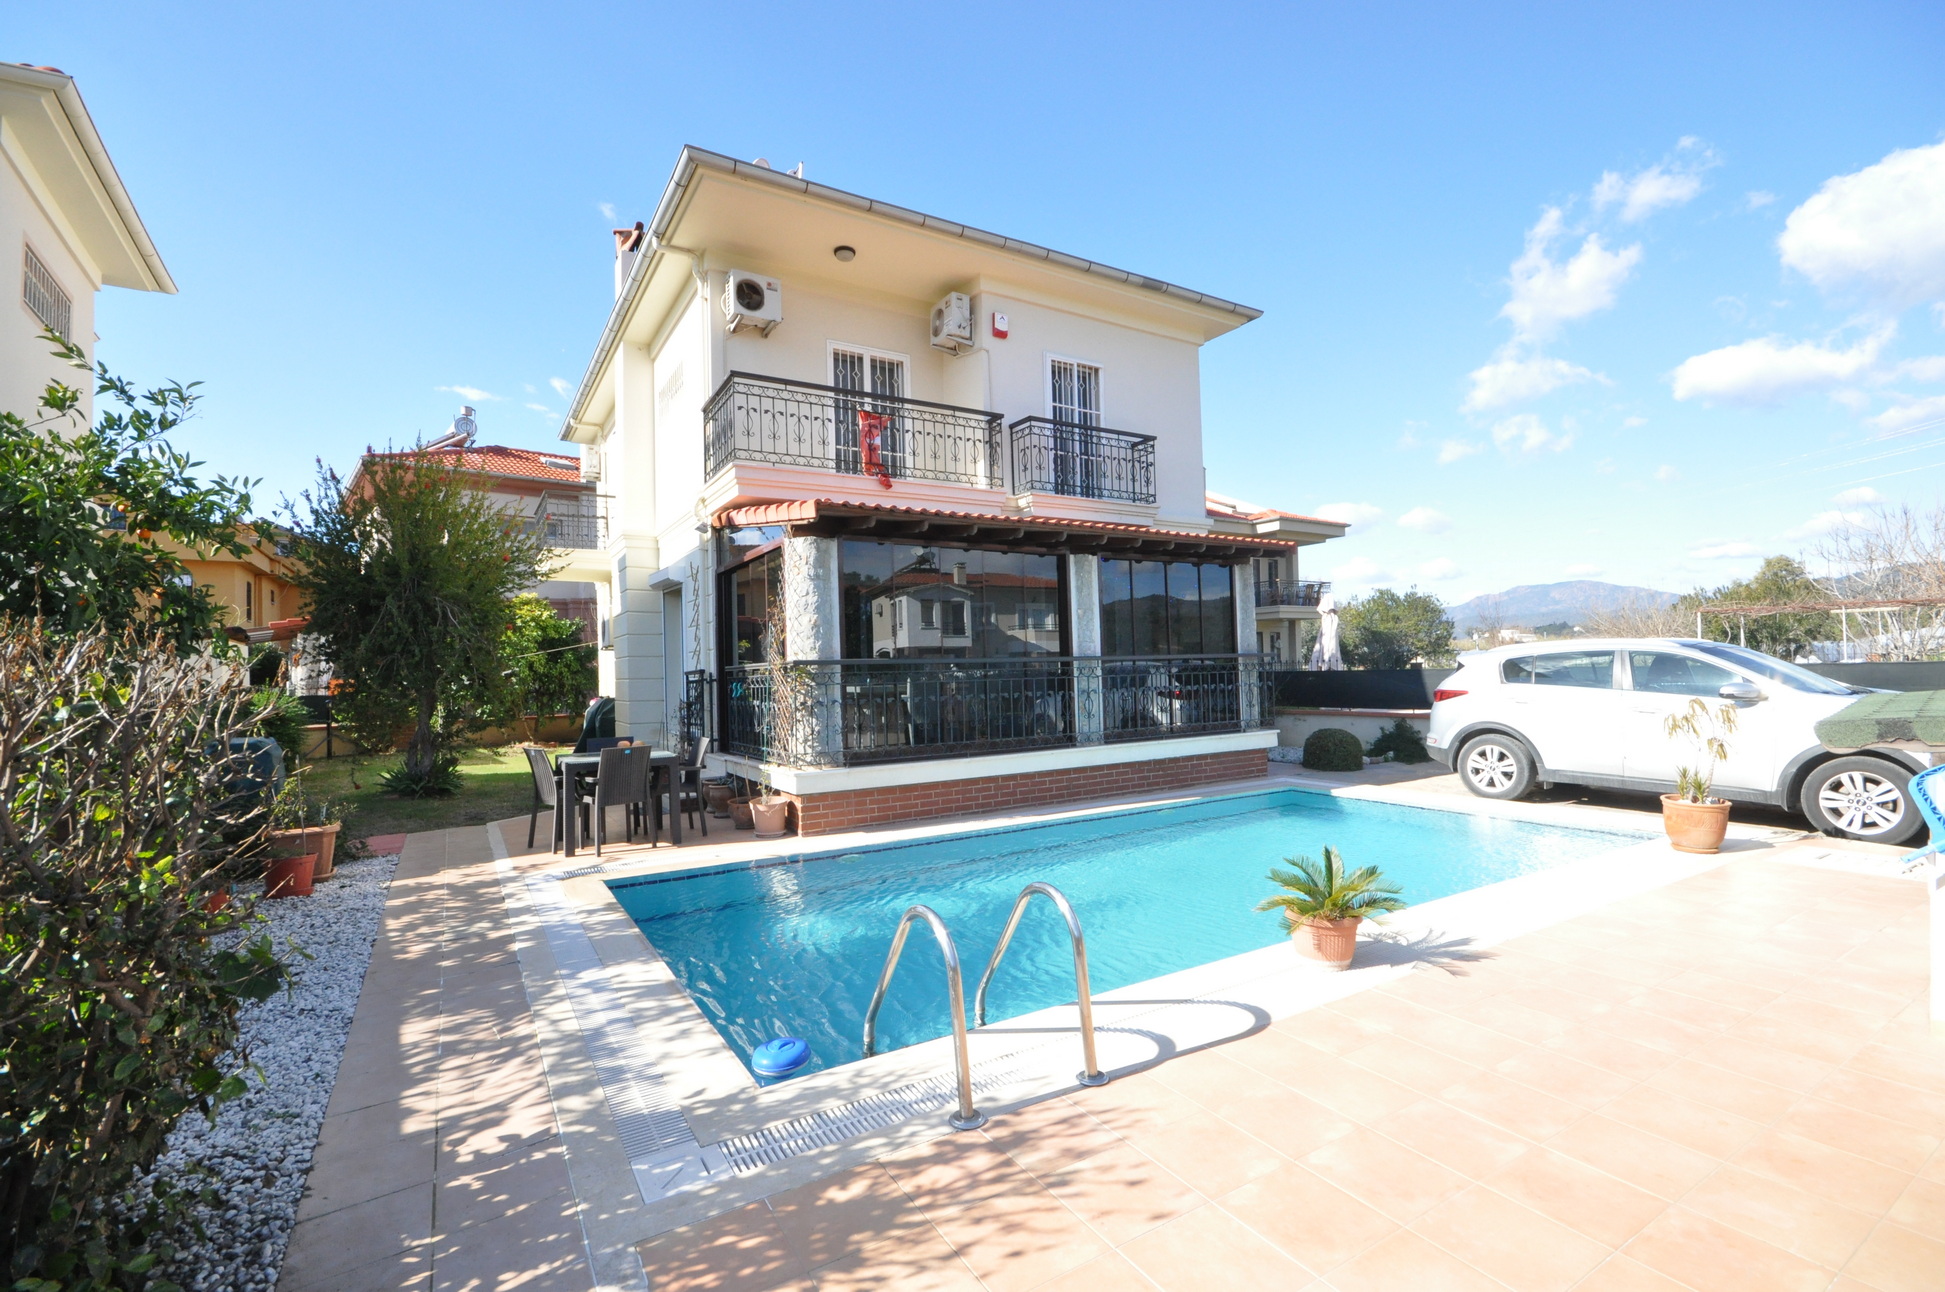 3 Bedroom Detached Villa with Private Pool and Gardens in Calis